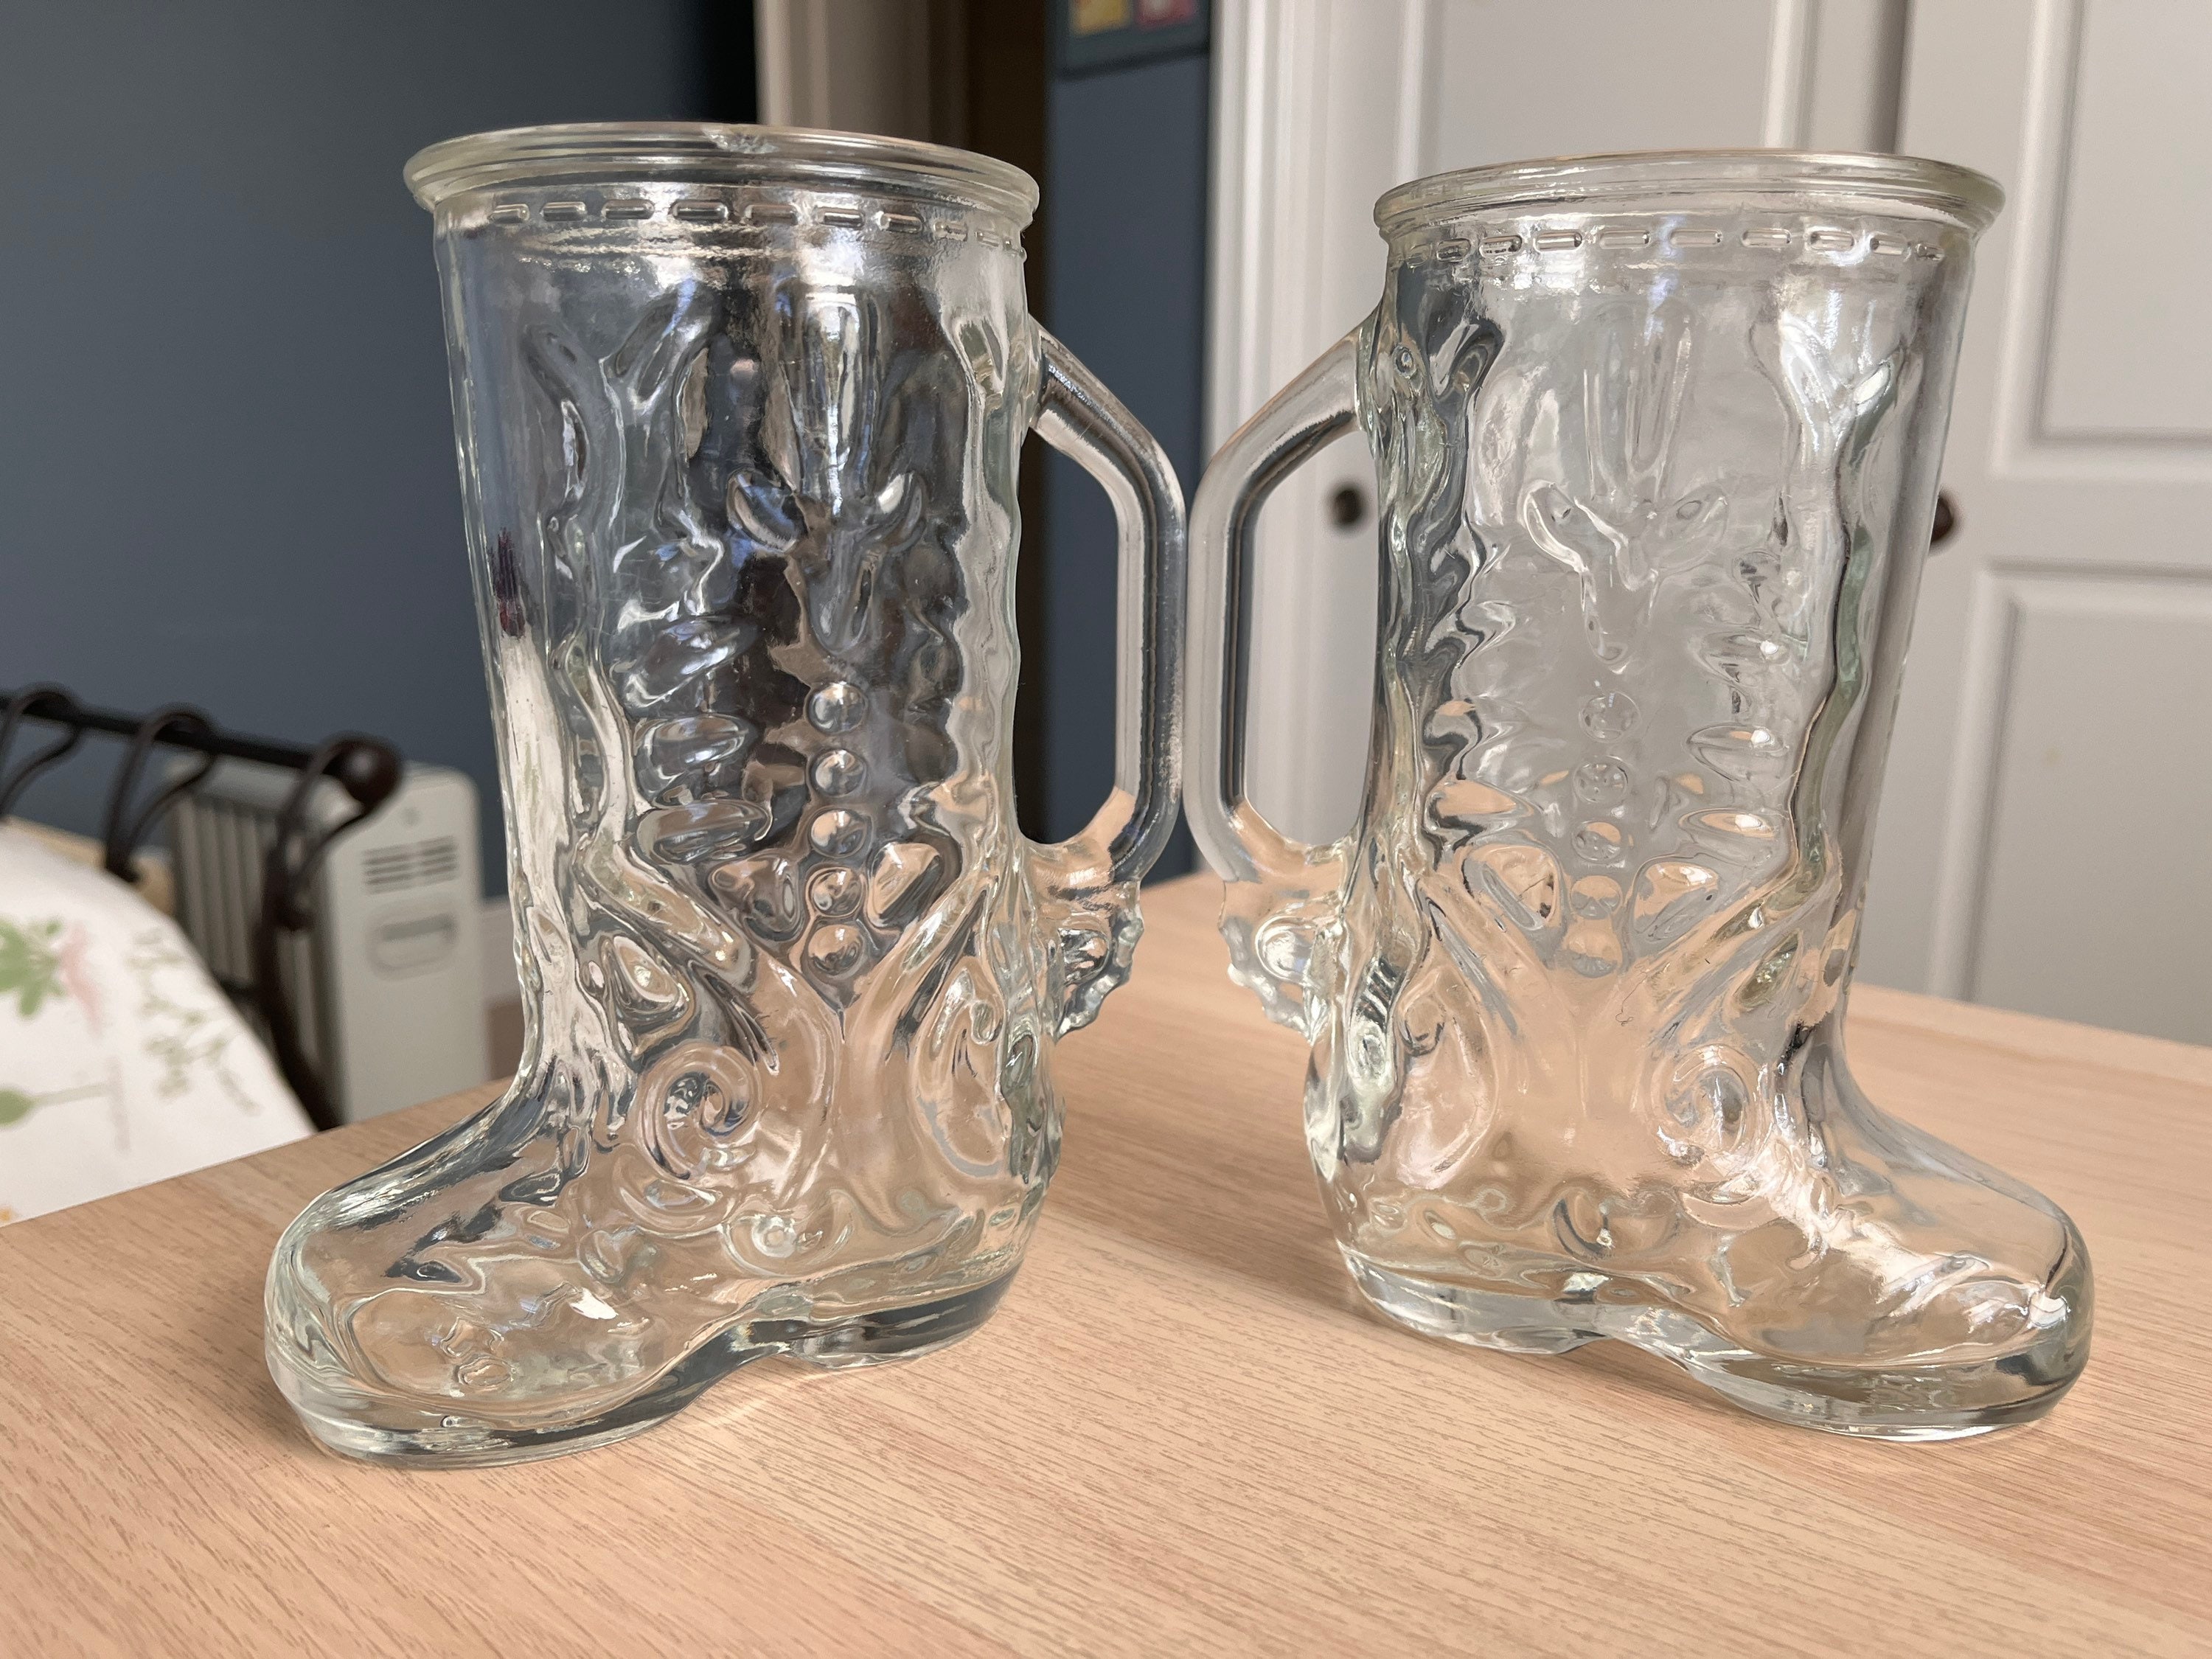 Fun Express Pack of 12 Cowboy Boot Mug, BPA Free Plastic, Raise Your Glass  in True Cowboy Fashion, Lightweight and Hassle-Free, Spill-Proof Design